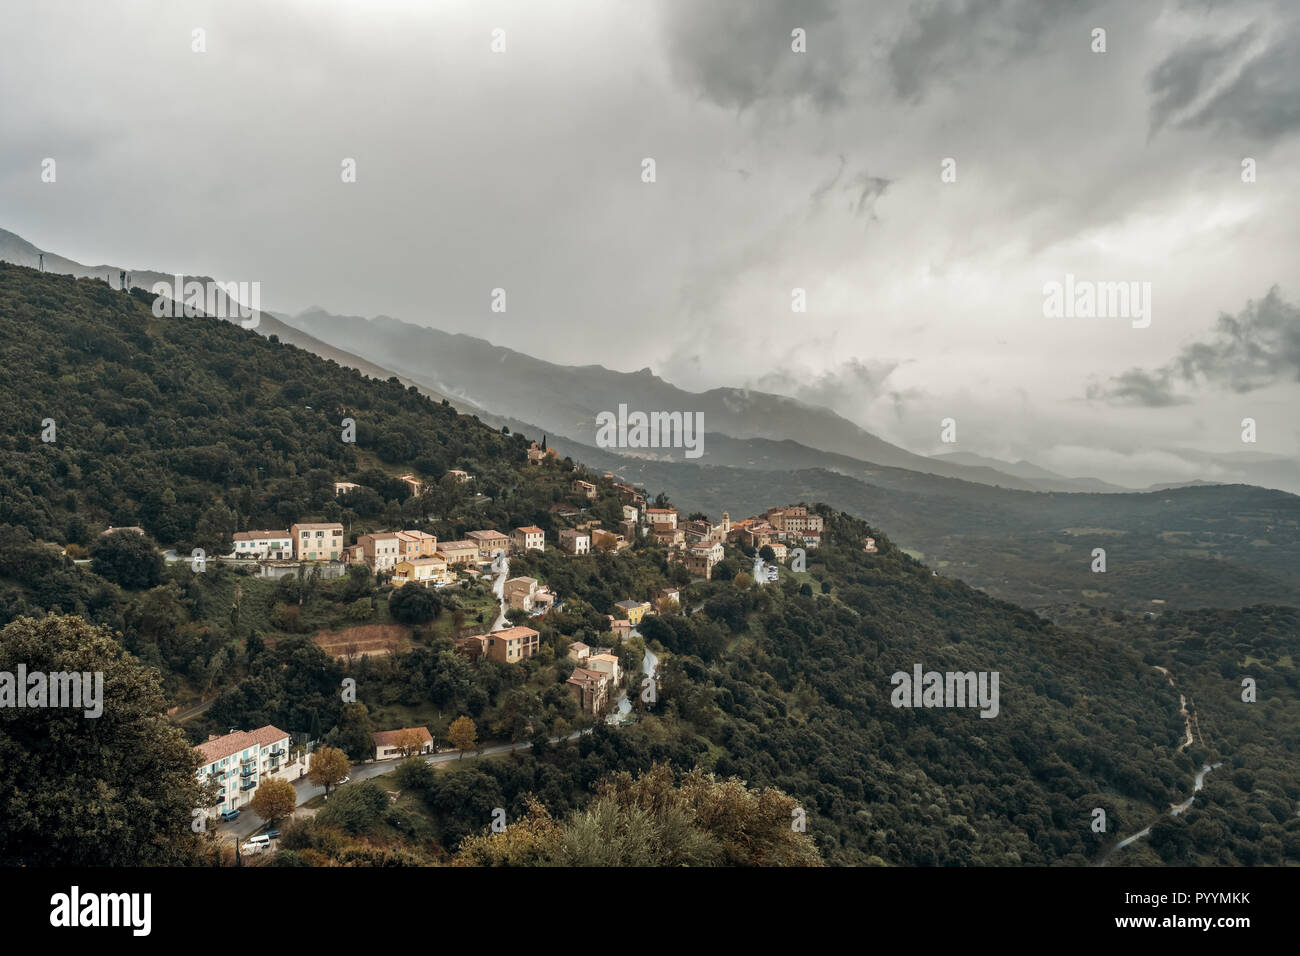 Dark stormy skies over the mountain village of Belgodere in the Balagne region of Corsica Stock Photo